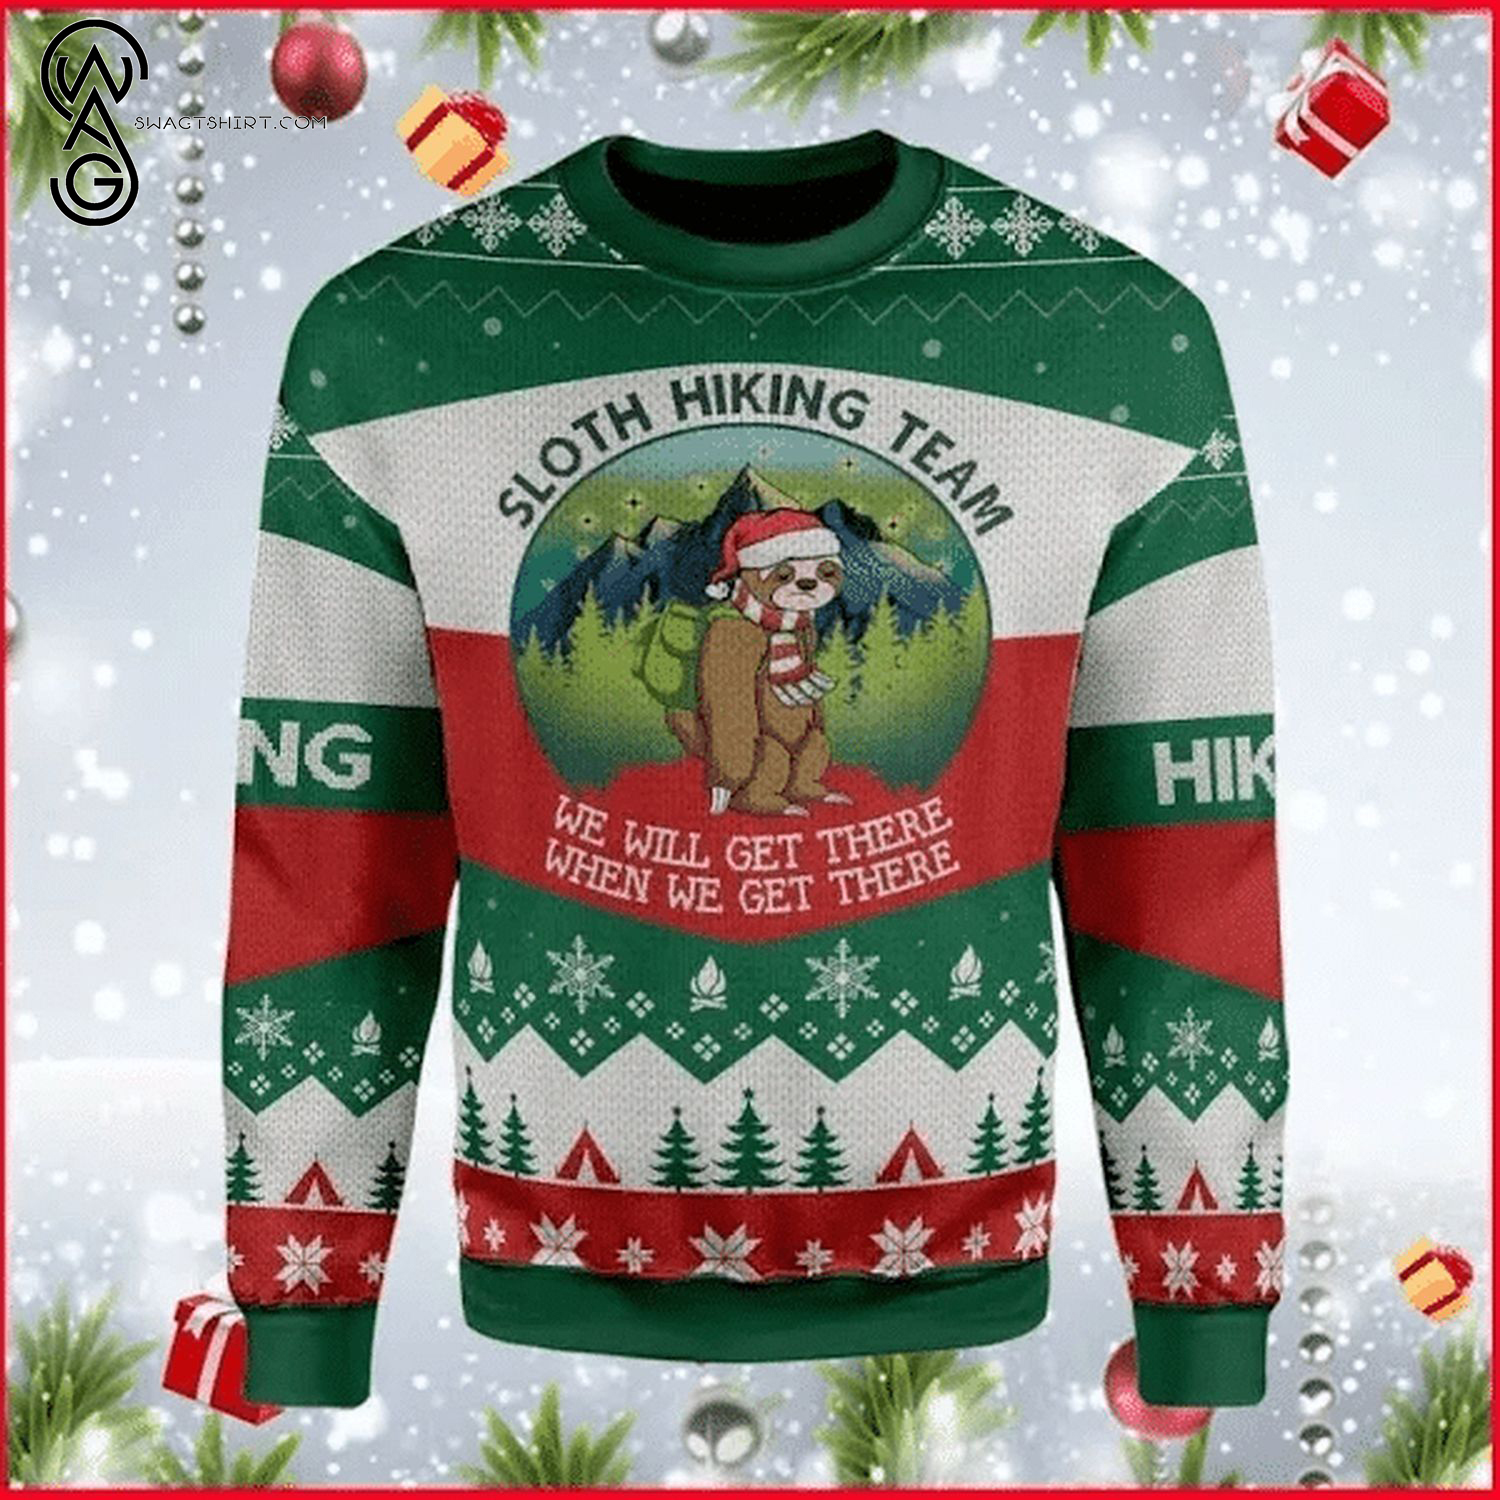 Sloth Hiking Team We'll Get There When We Get There Ugly Christmas Sweater